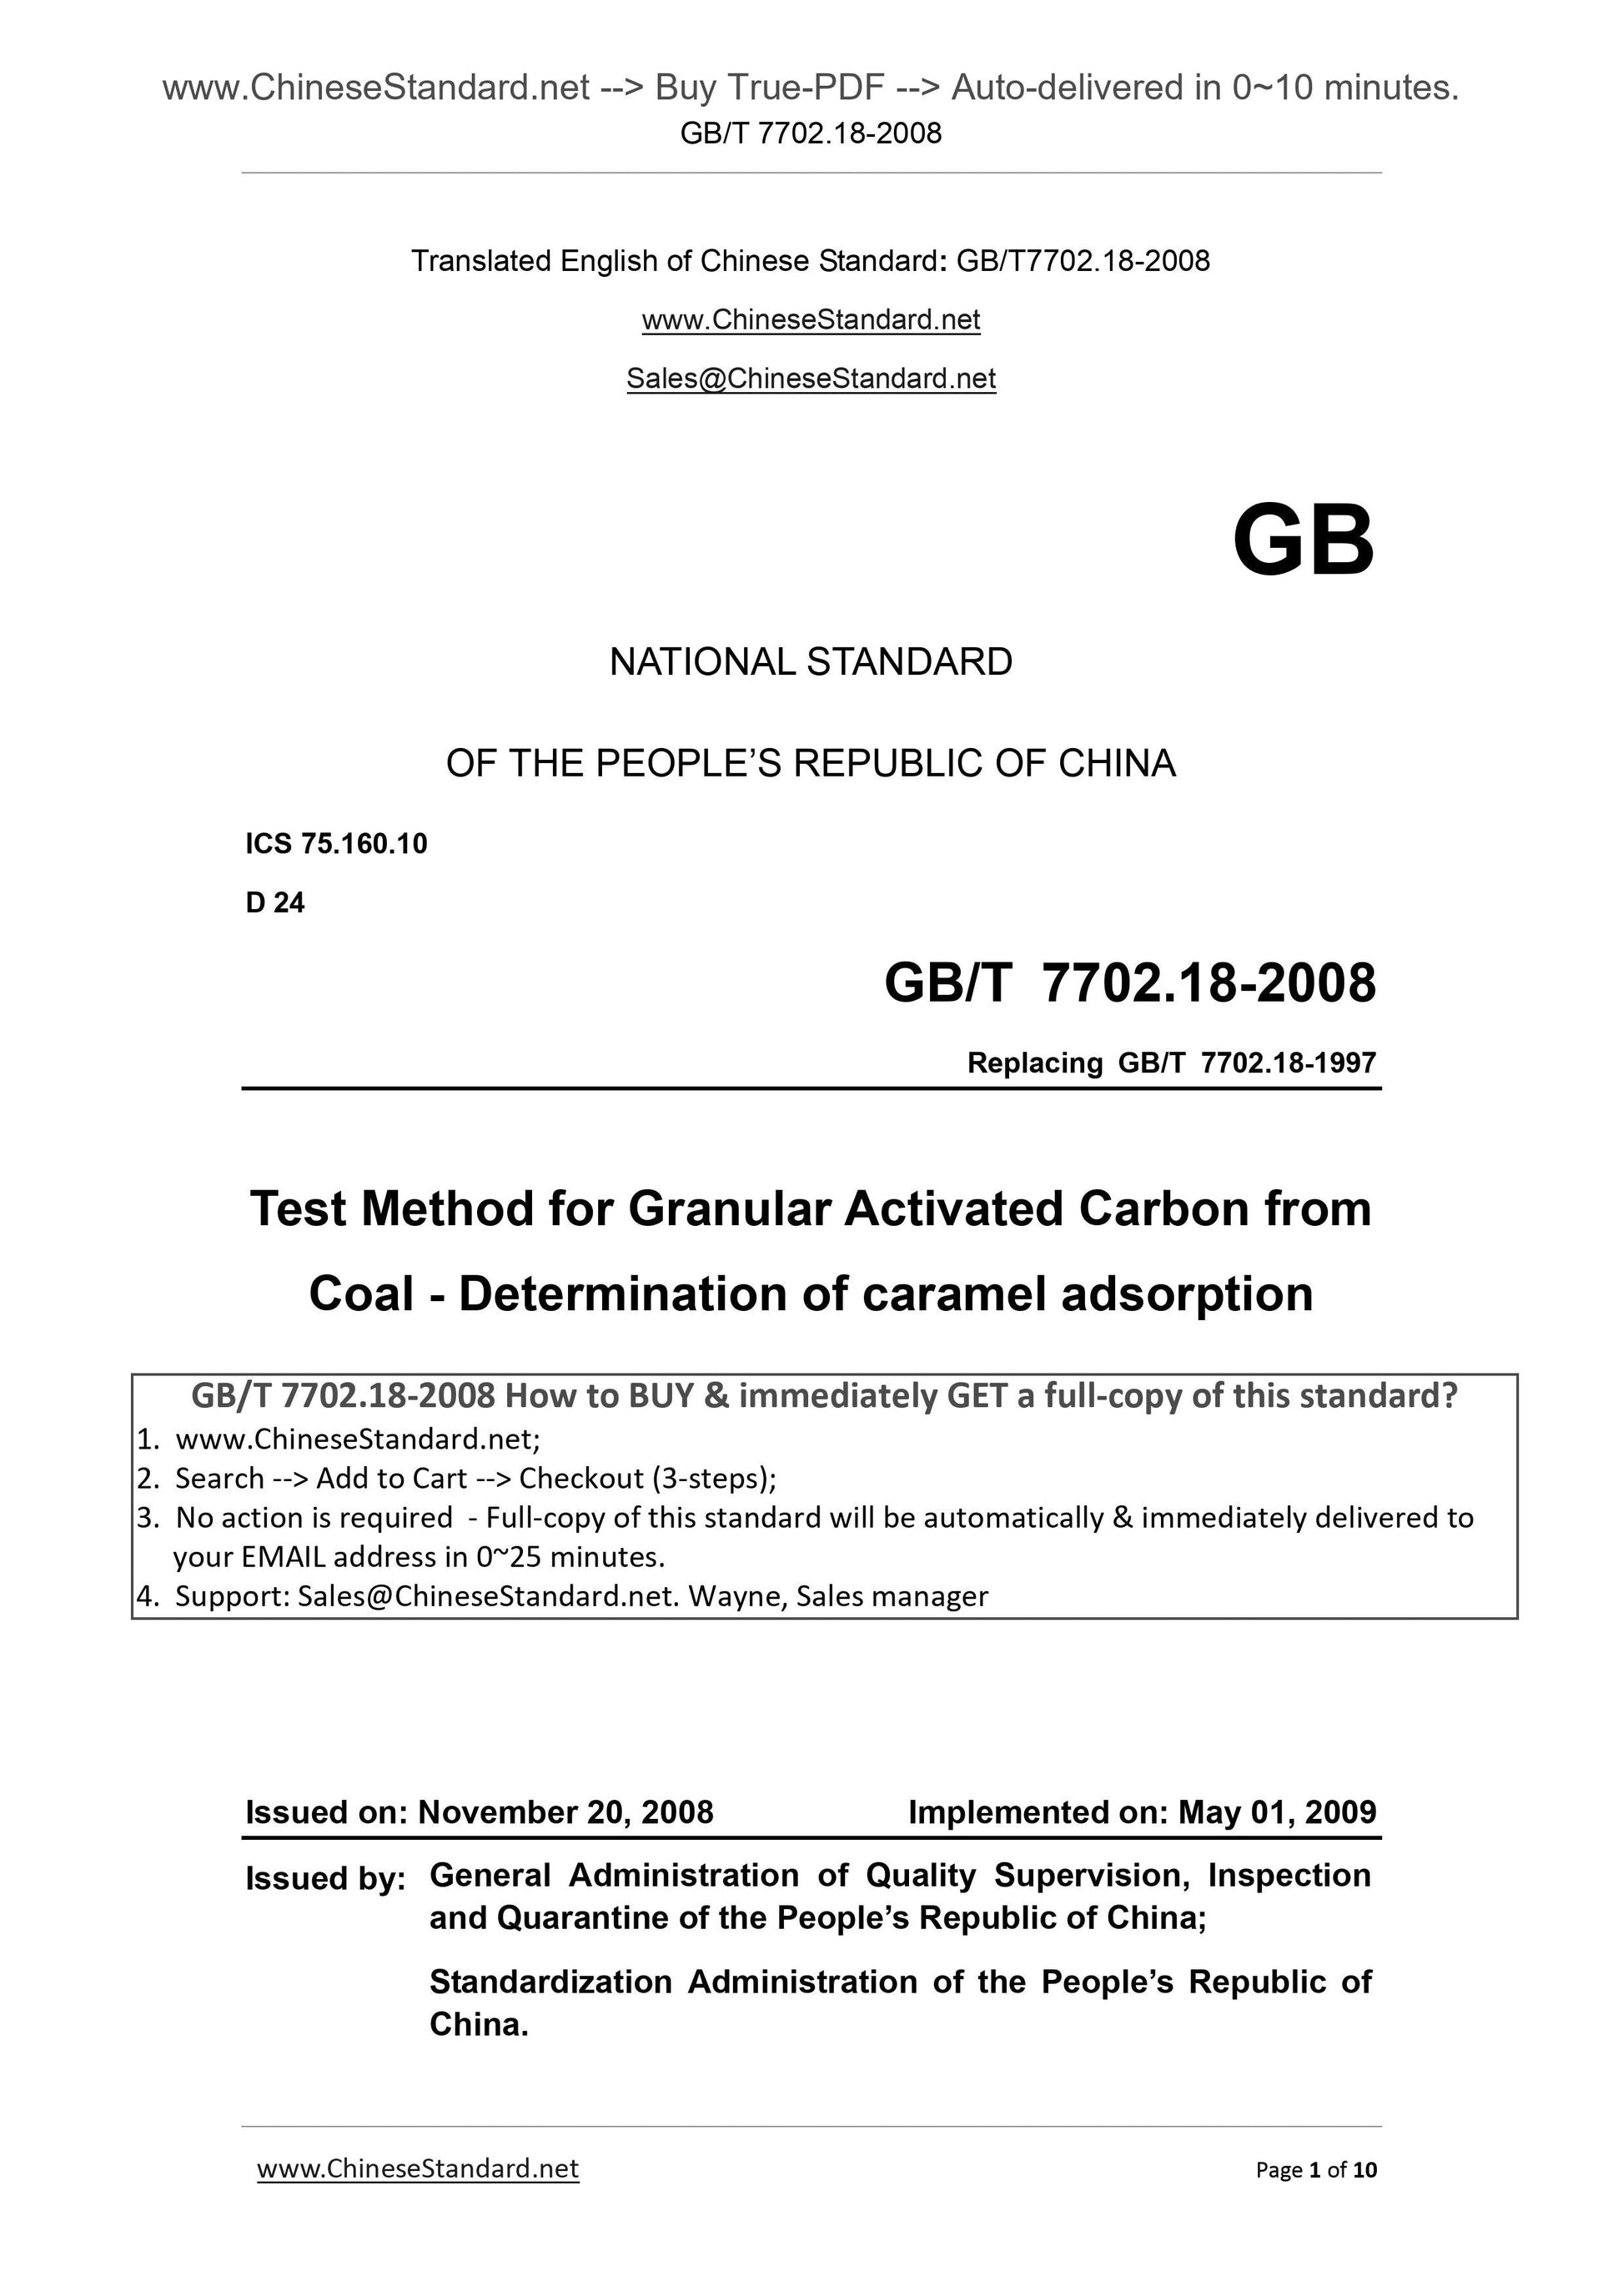 GB/T 7702.18-2008 Page 1